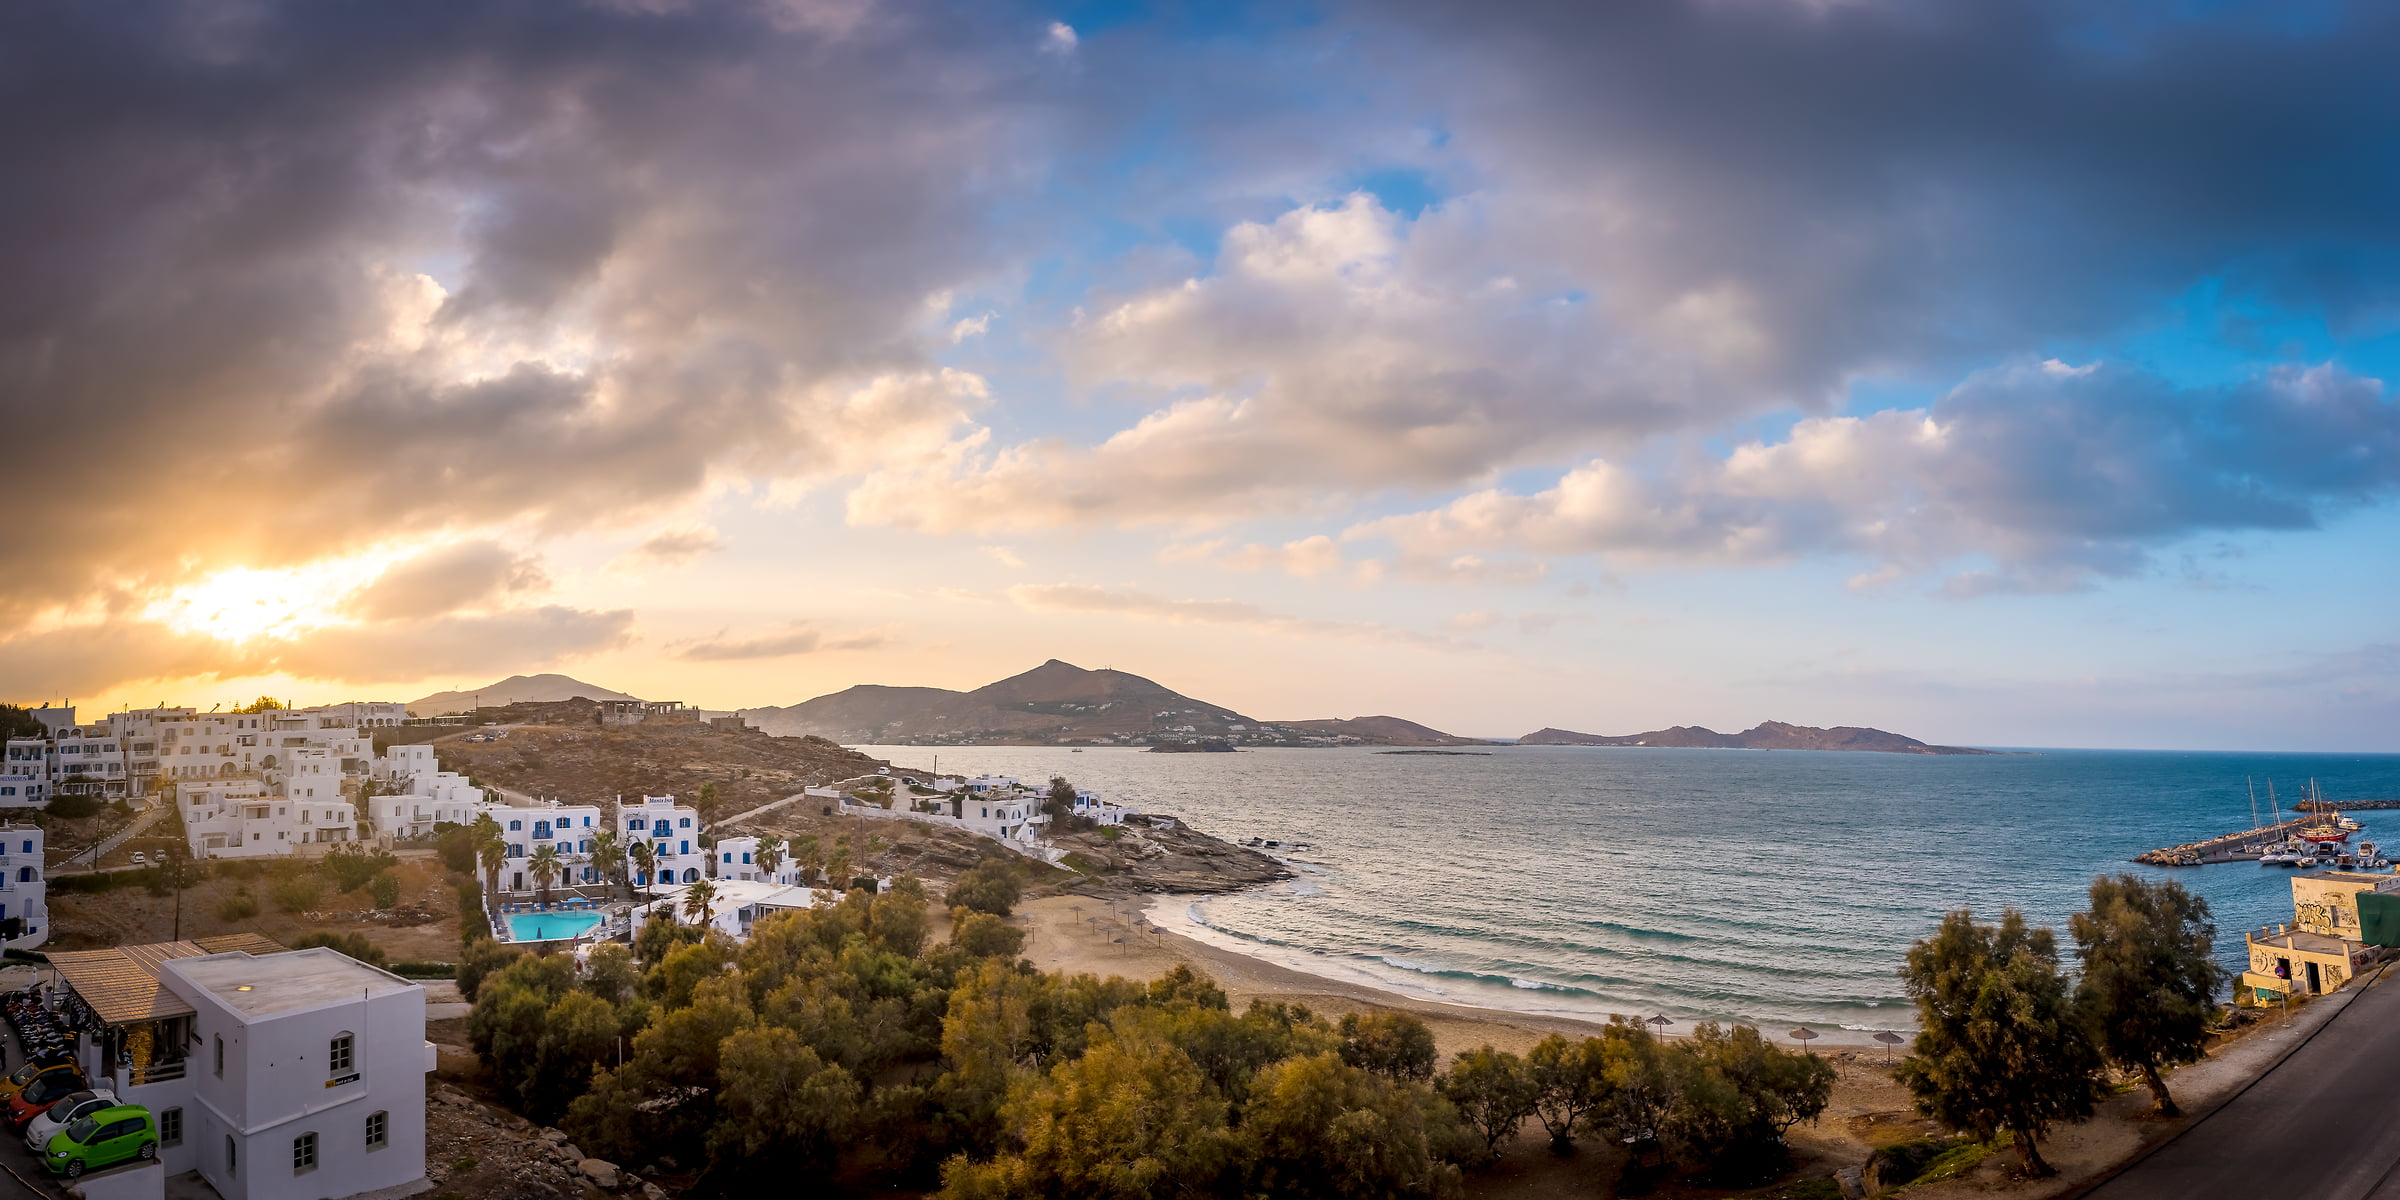 201 megapixels! A very high resolution, large-format VAST photo print of a Greek island at sunset; landscape photograph created by Justin Katz in Naoussa Beach, Paros, Greece